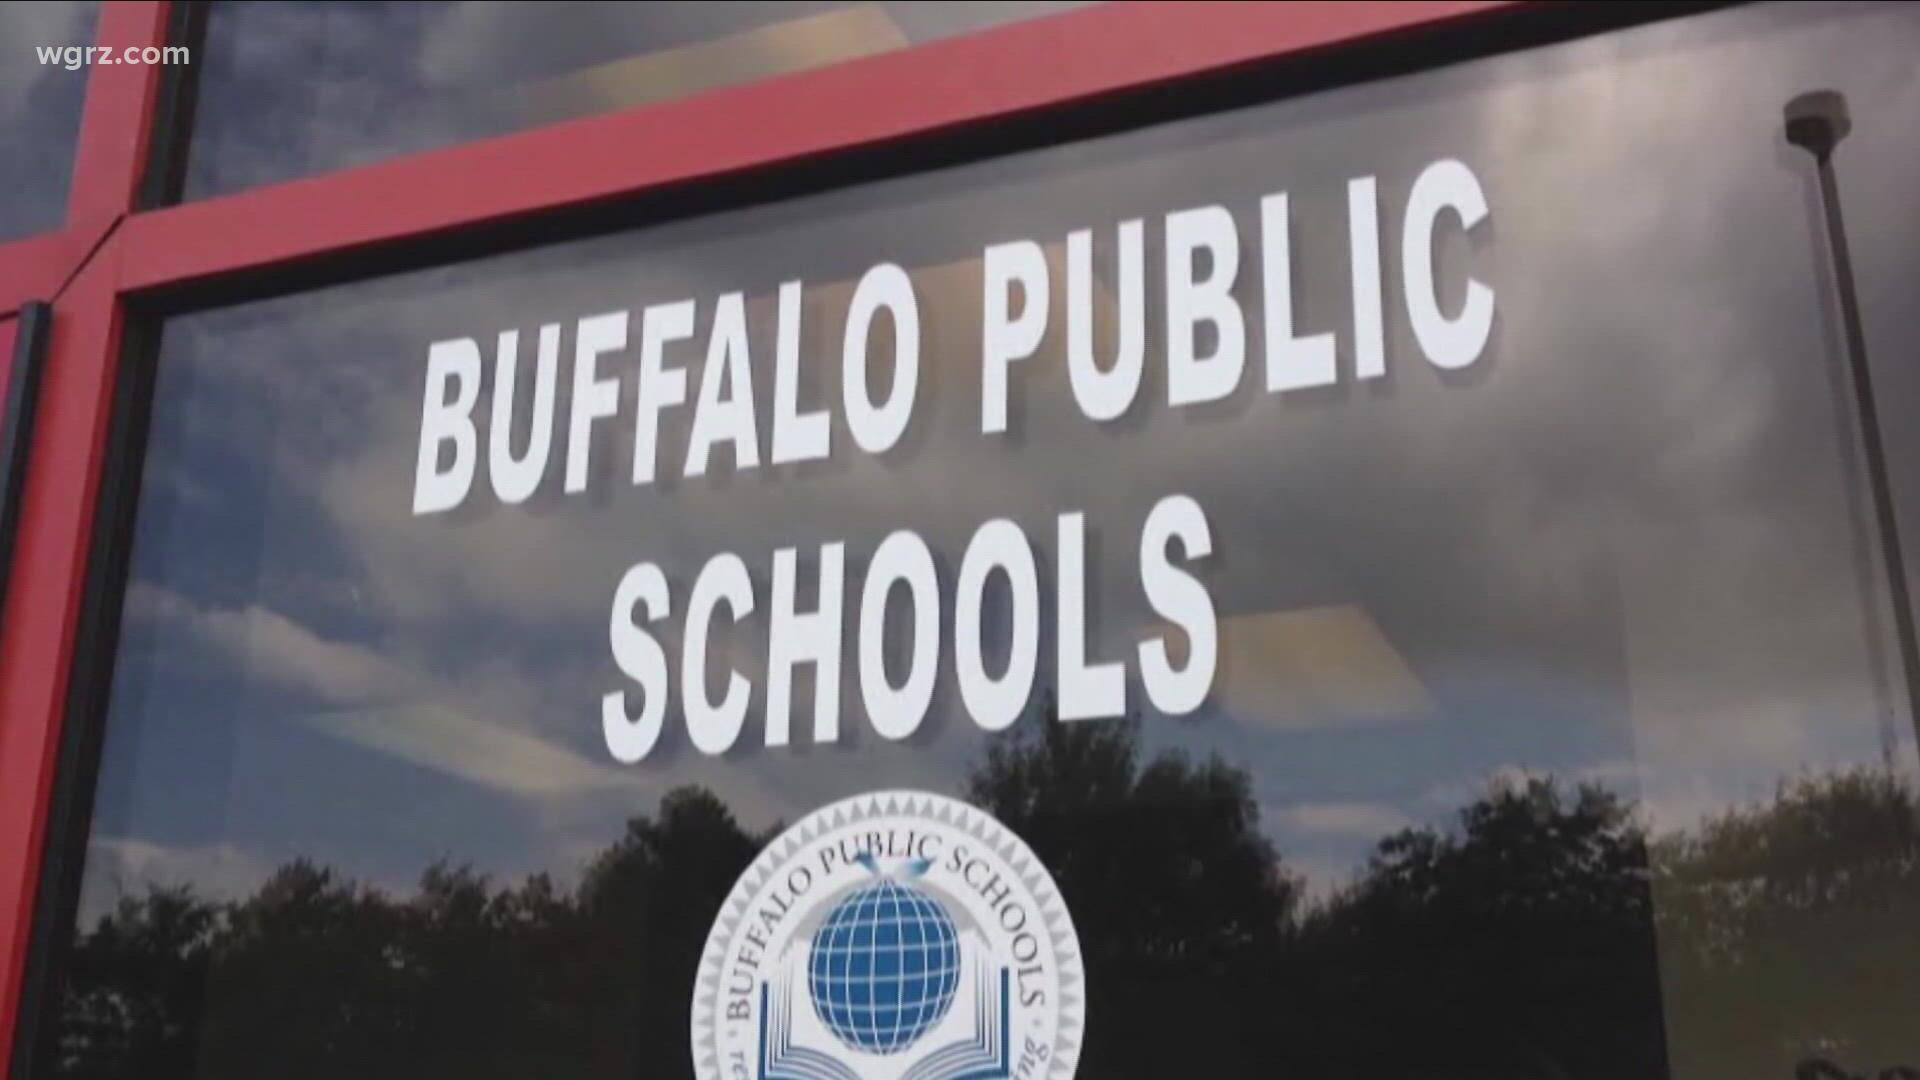 The Buffalo Public School District has reported having 800 new COVID cases since September 3 and says more students are being hospitalized with the virus.